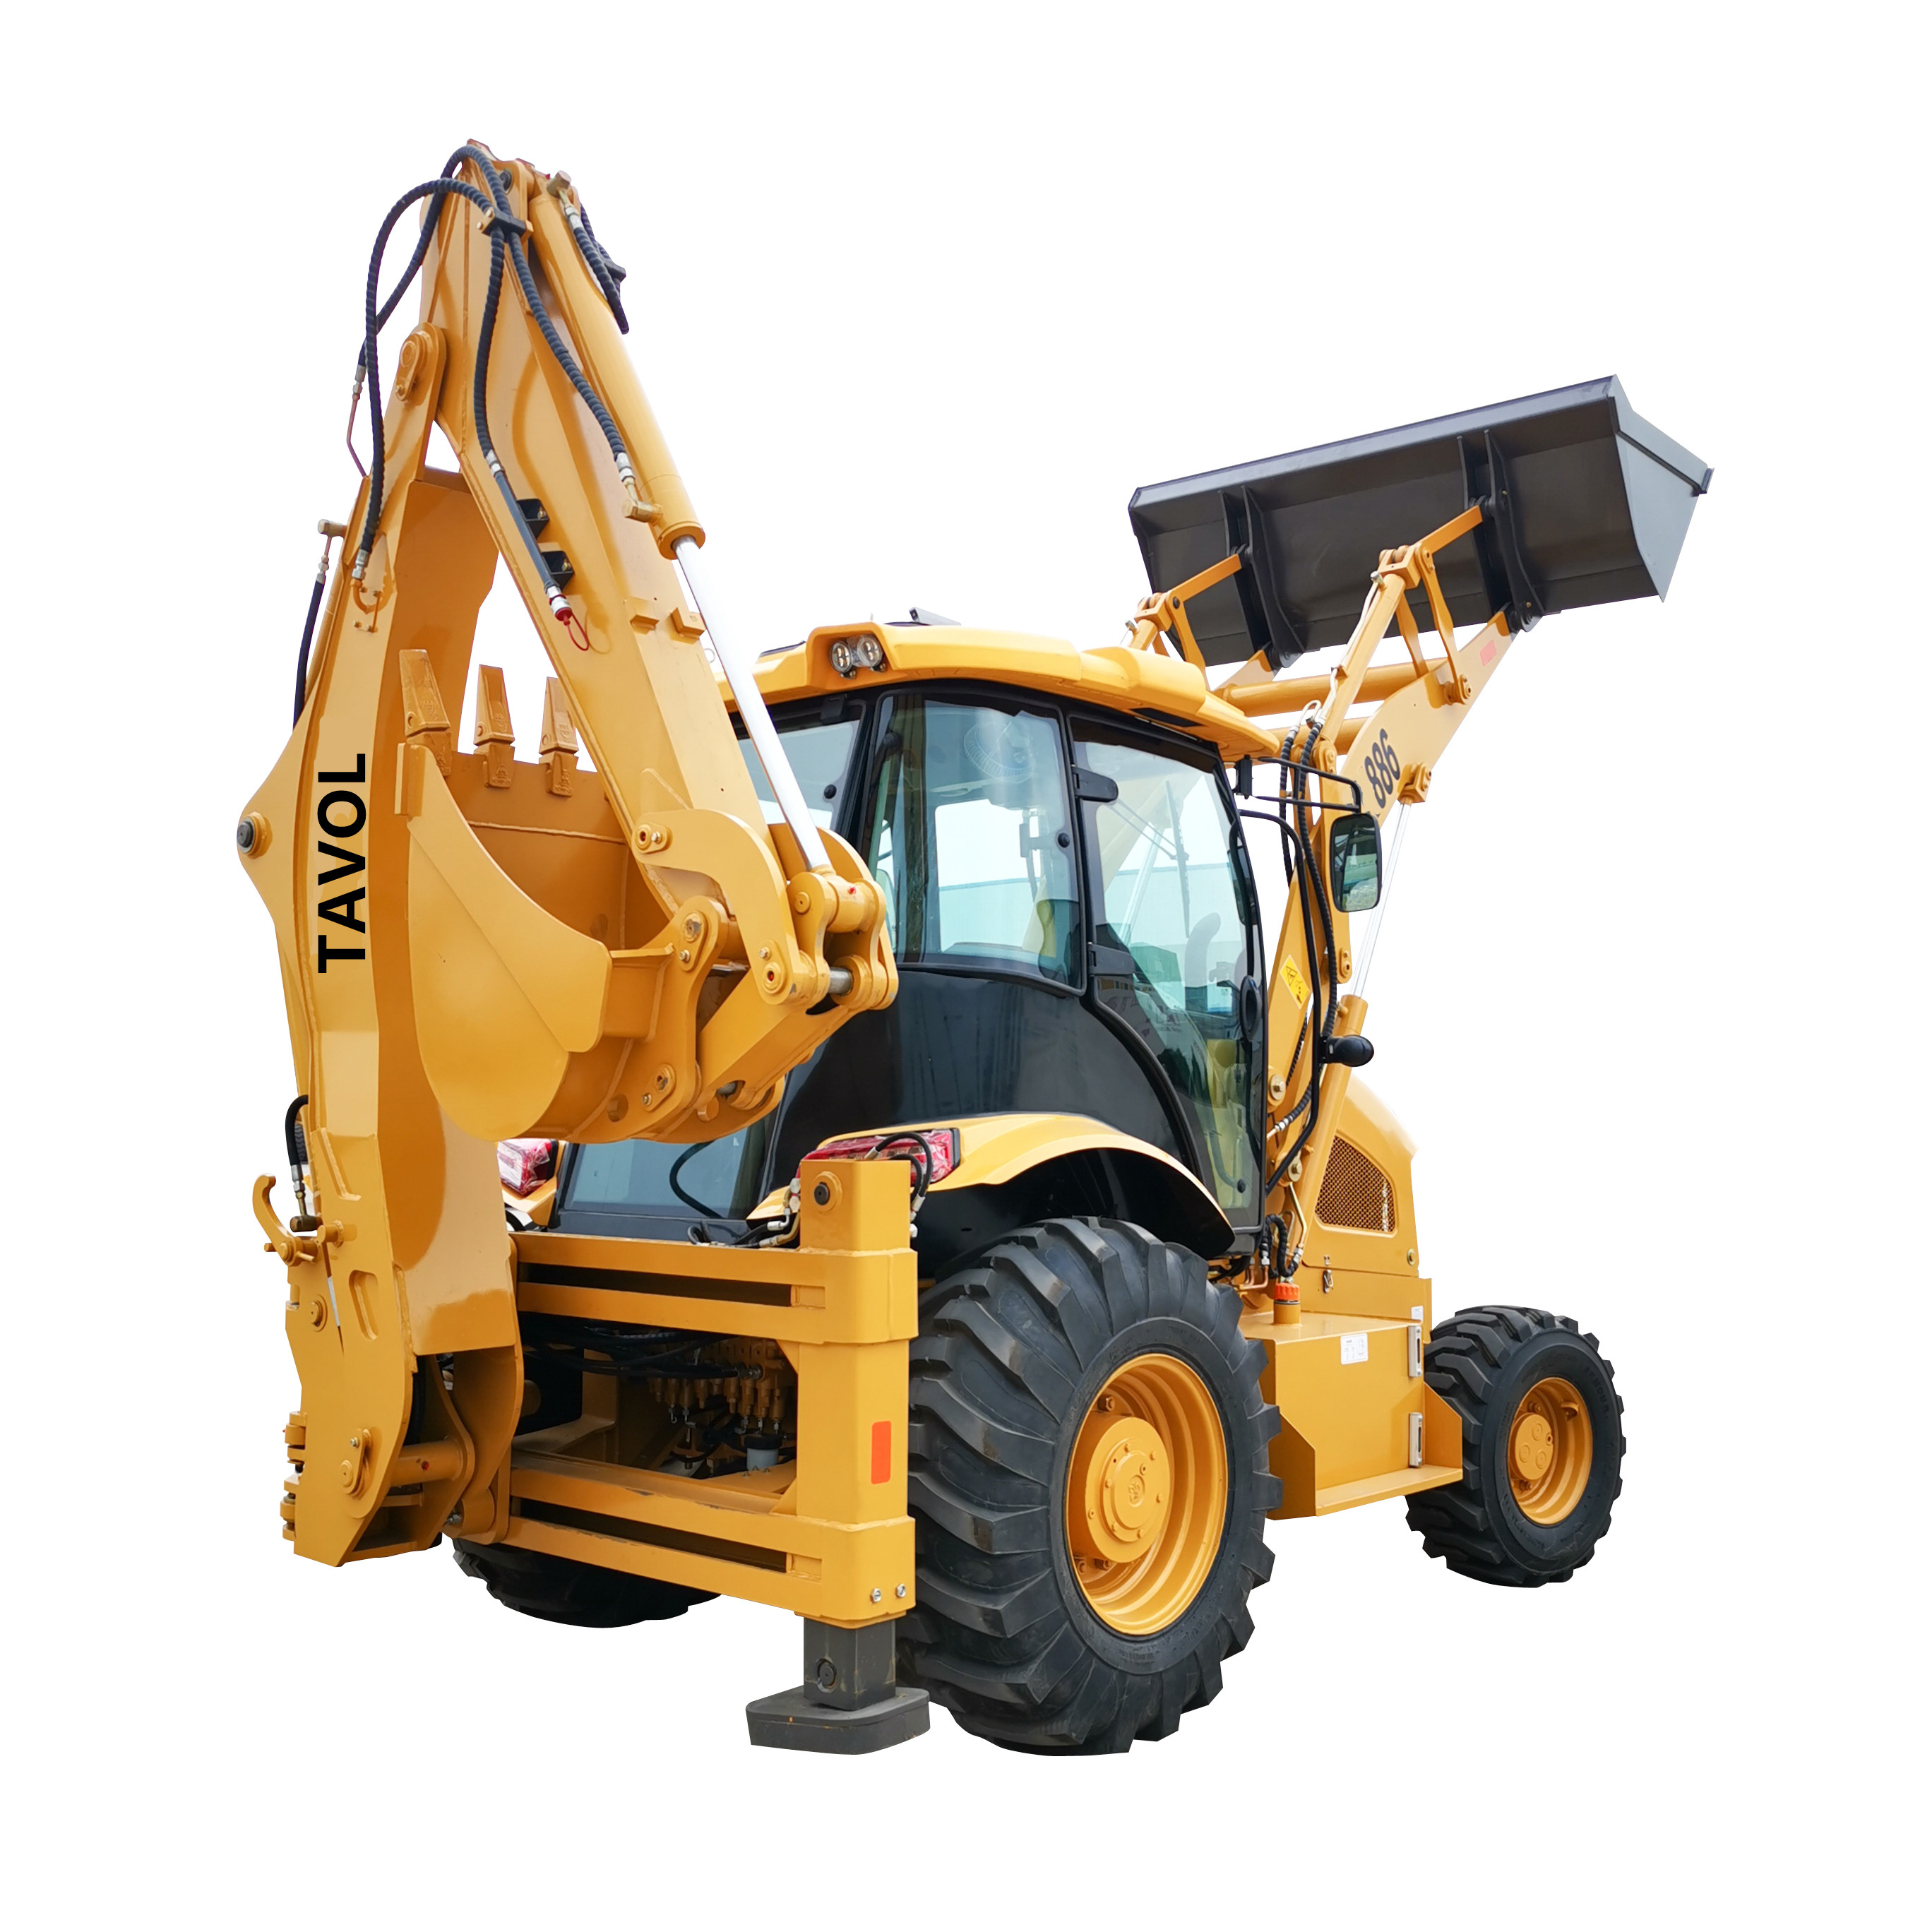 TAVOL 4-wheel steer 2.5 ton 388H ROPS with A/C small backhoe loader with competitive price.